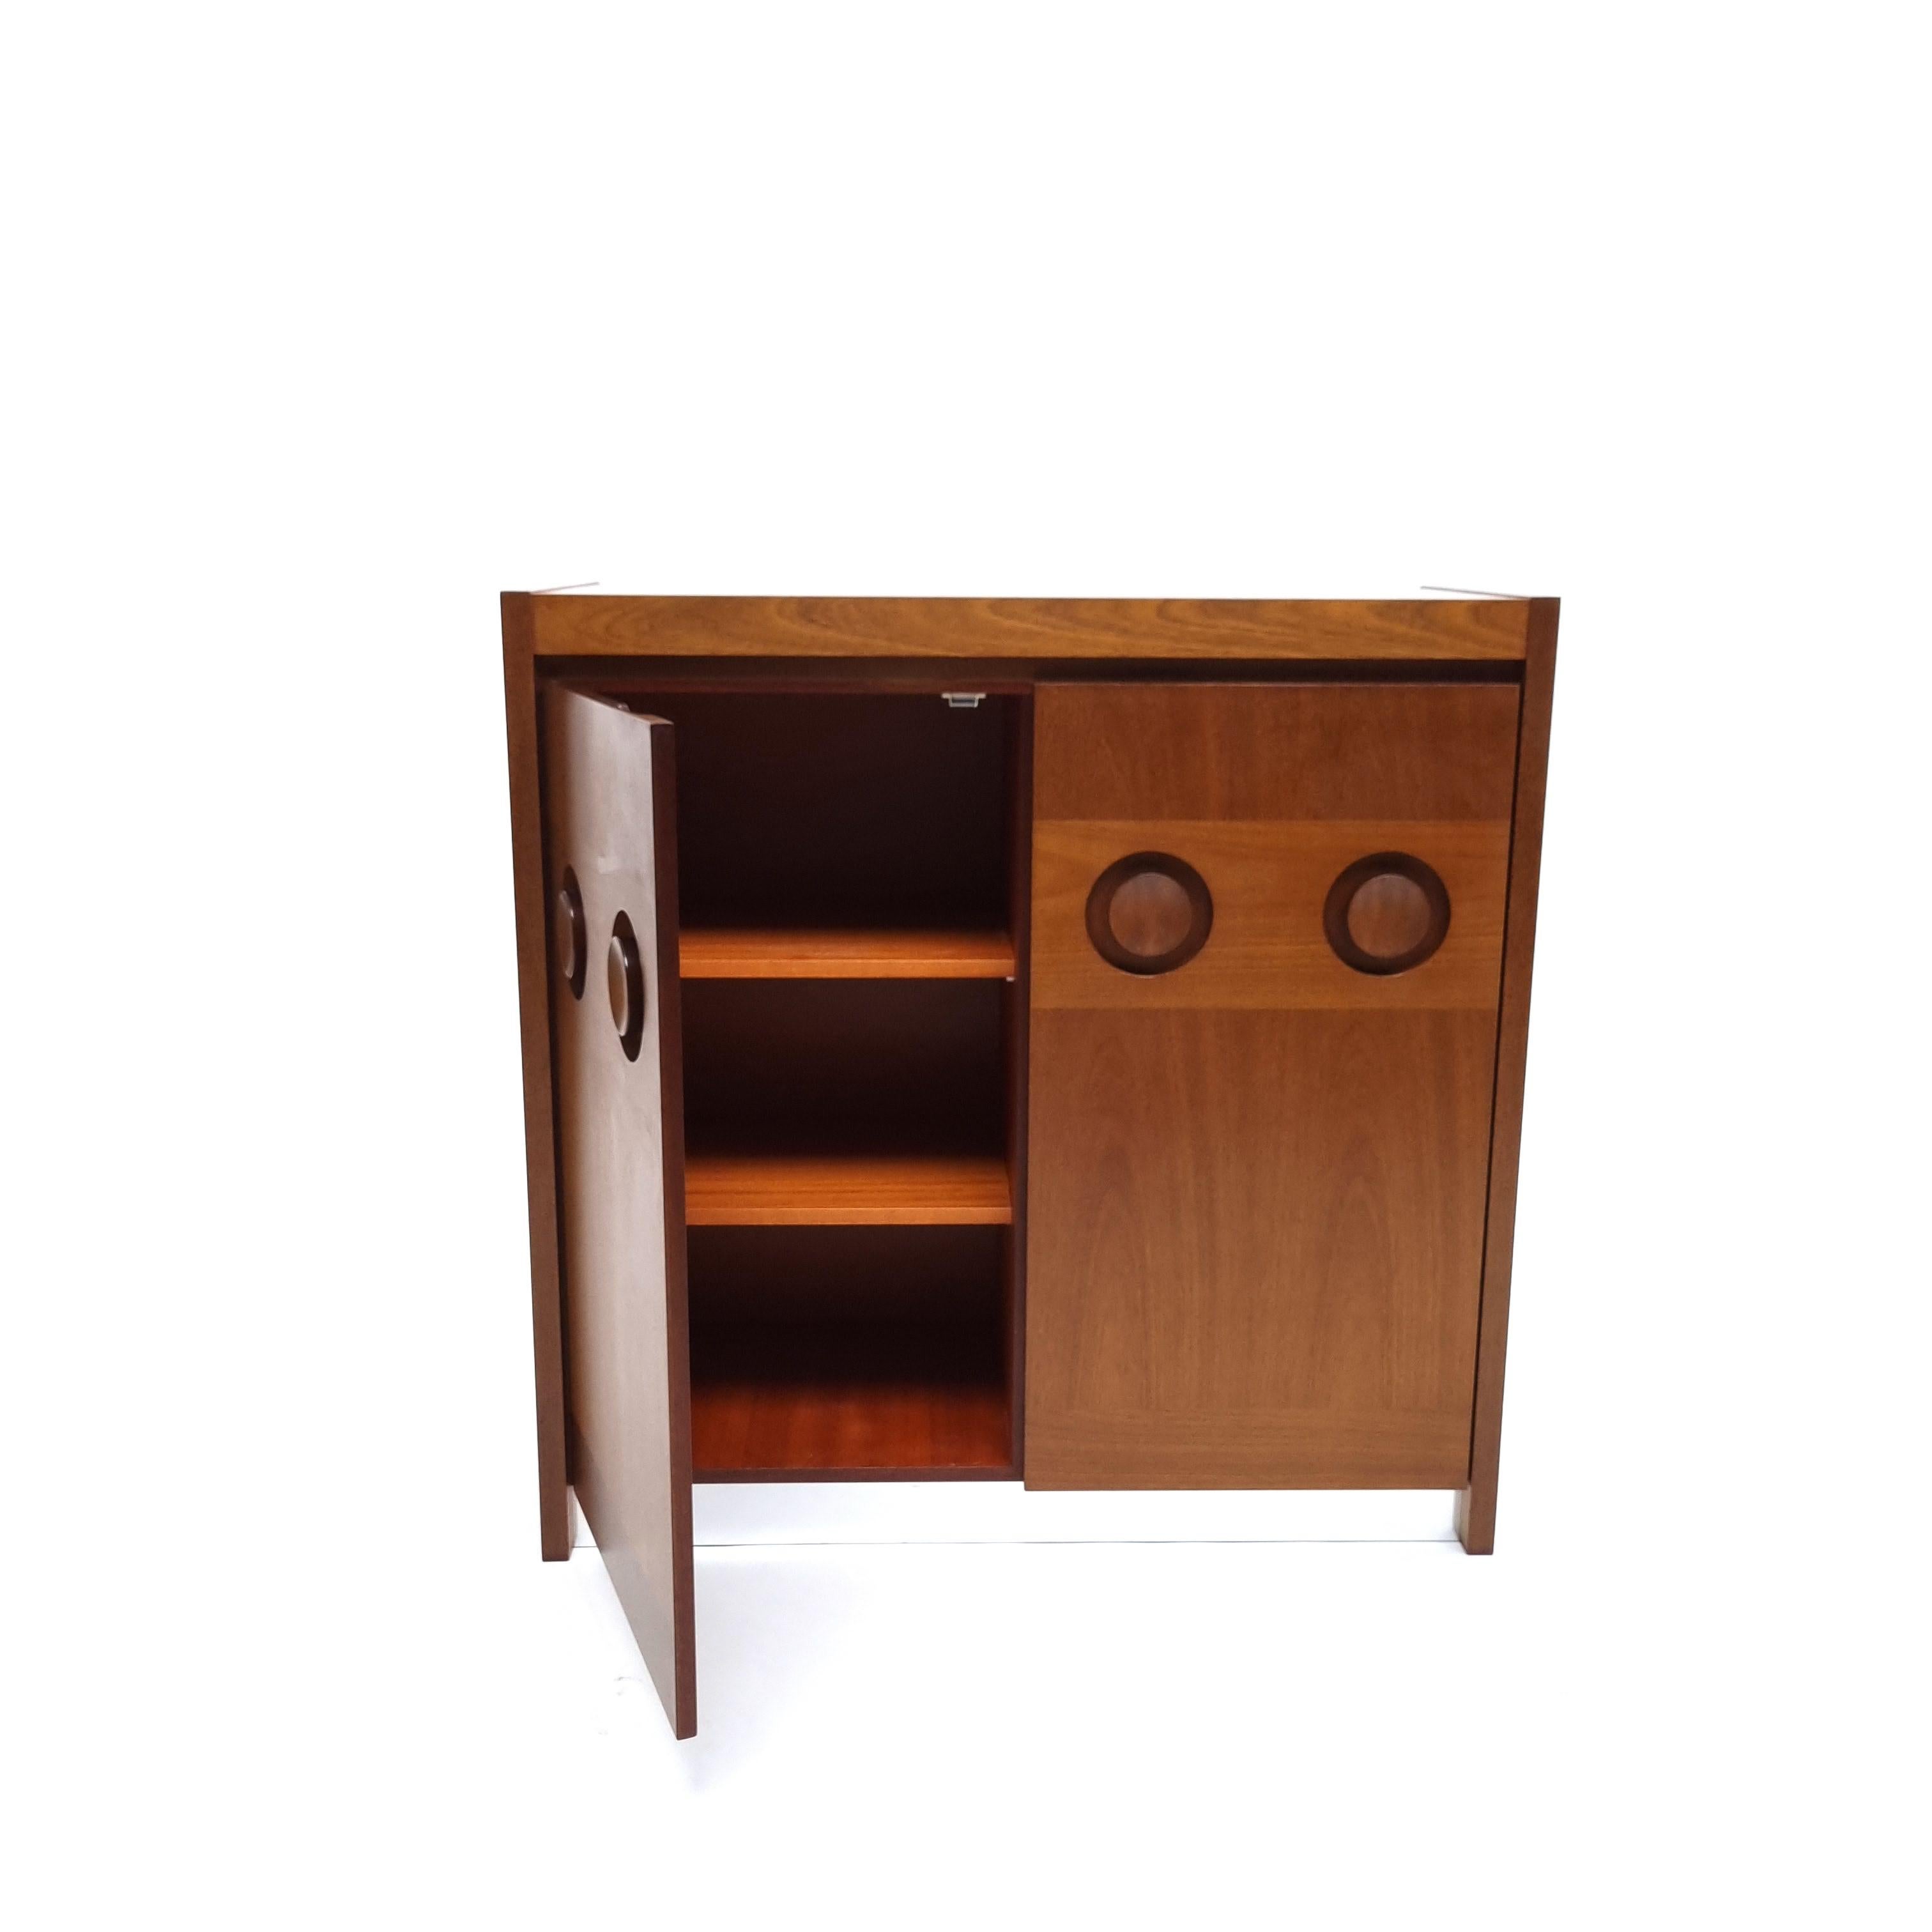 Brutalist mahogany sideboard or credenza by De Coene Frères. Two doors fastened by magnets open to reveal three storage cubicles.